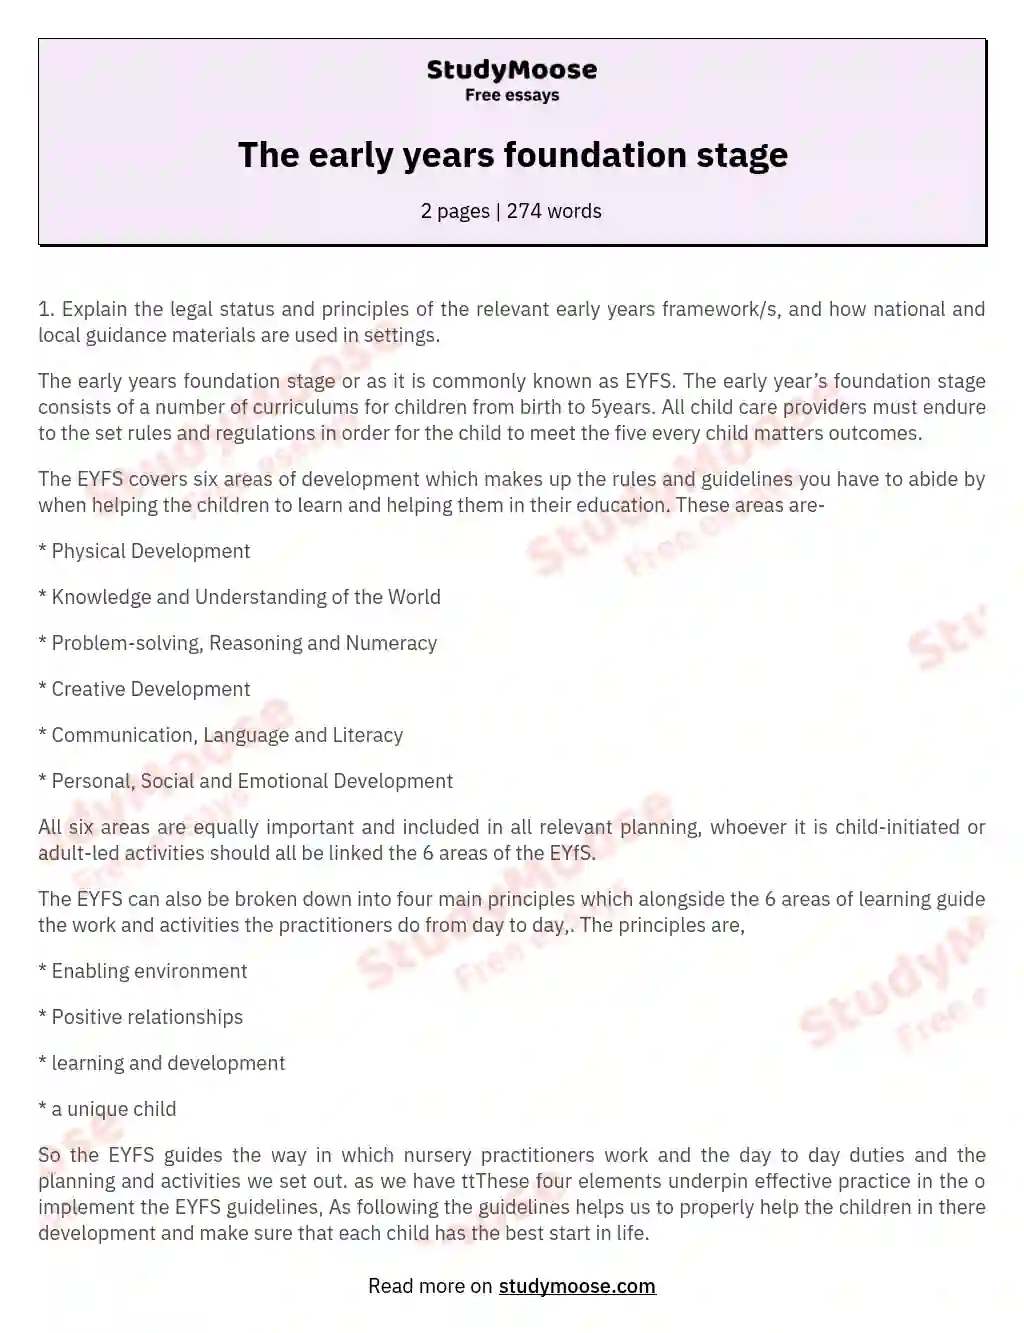 The early years foundation stage essay